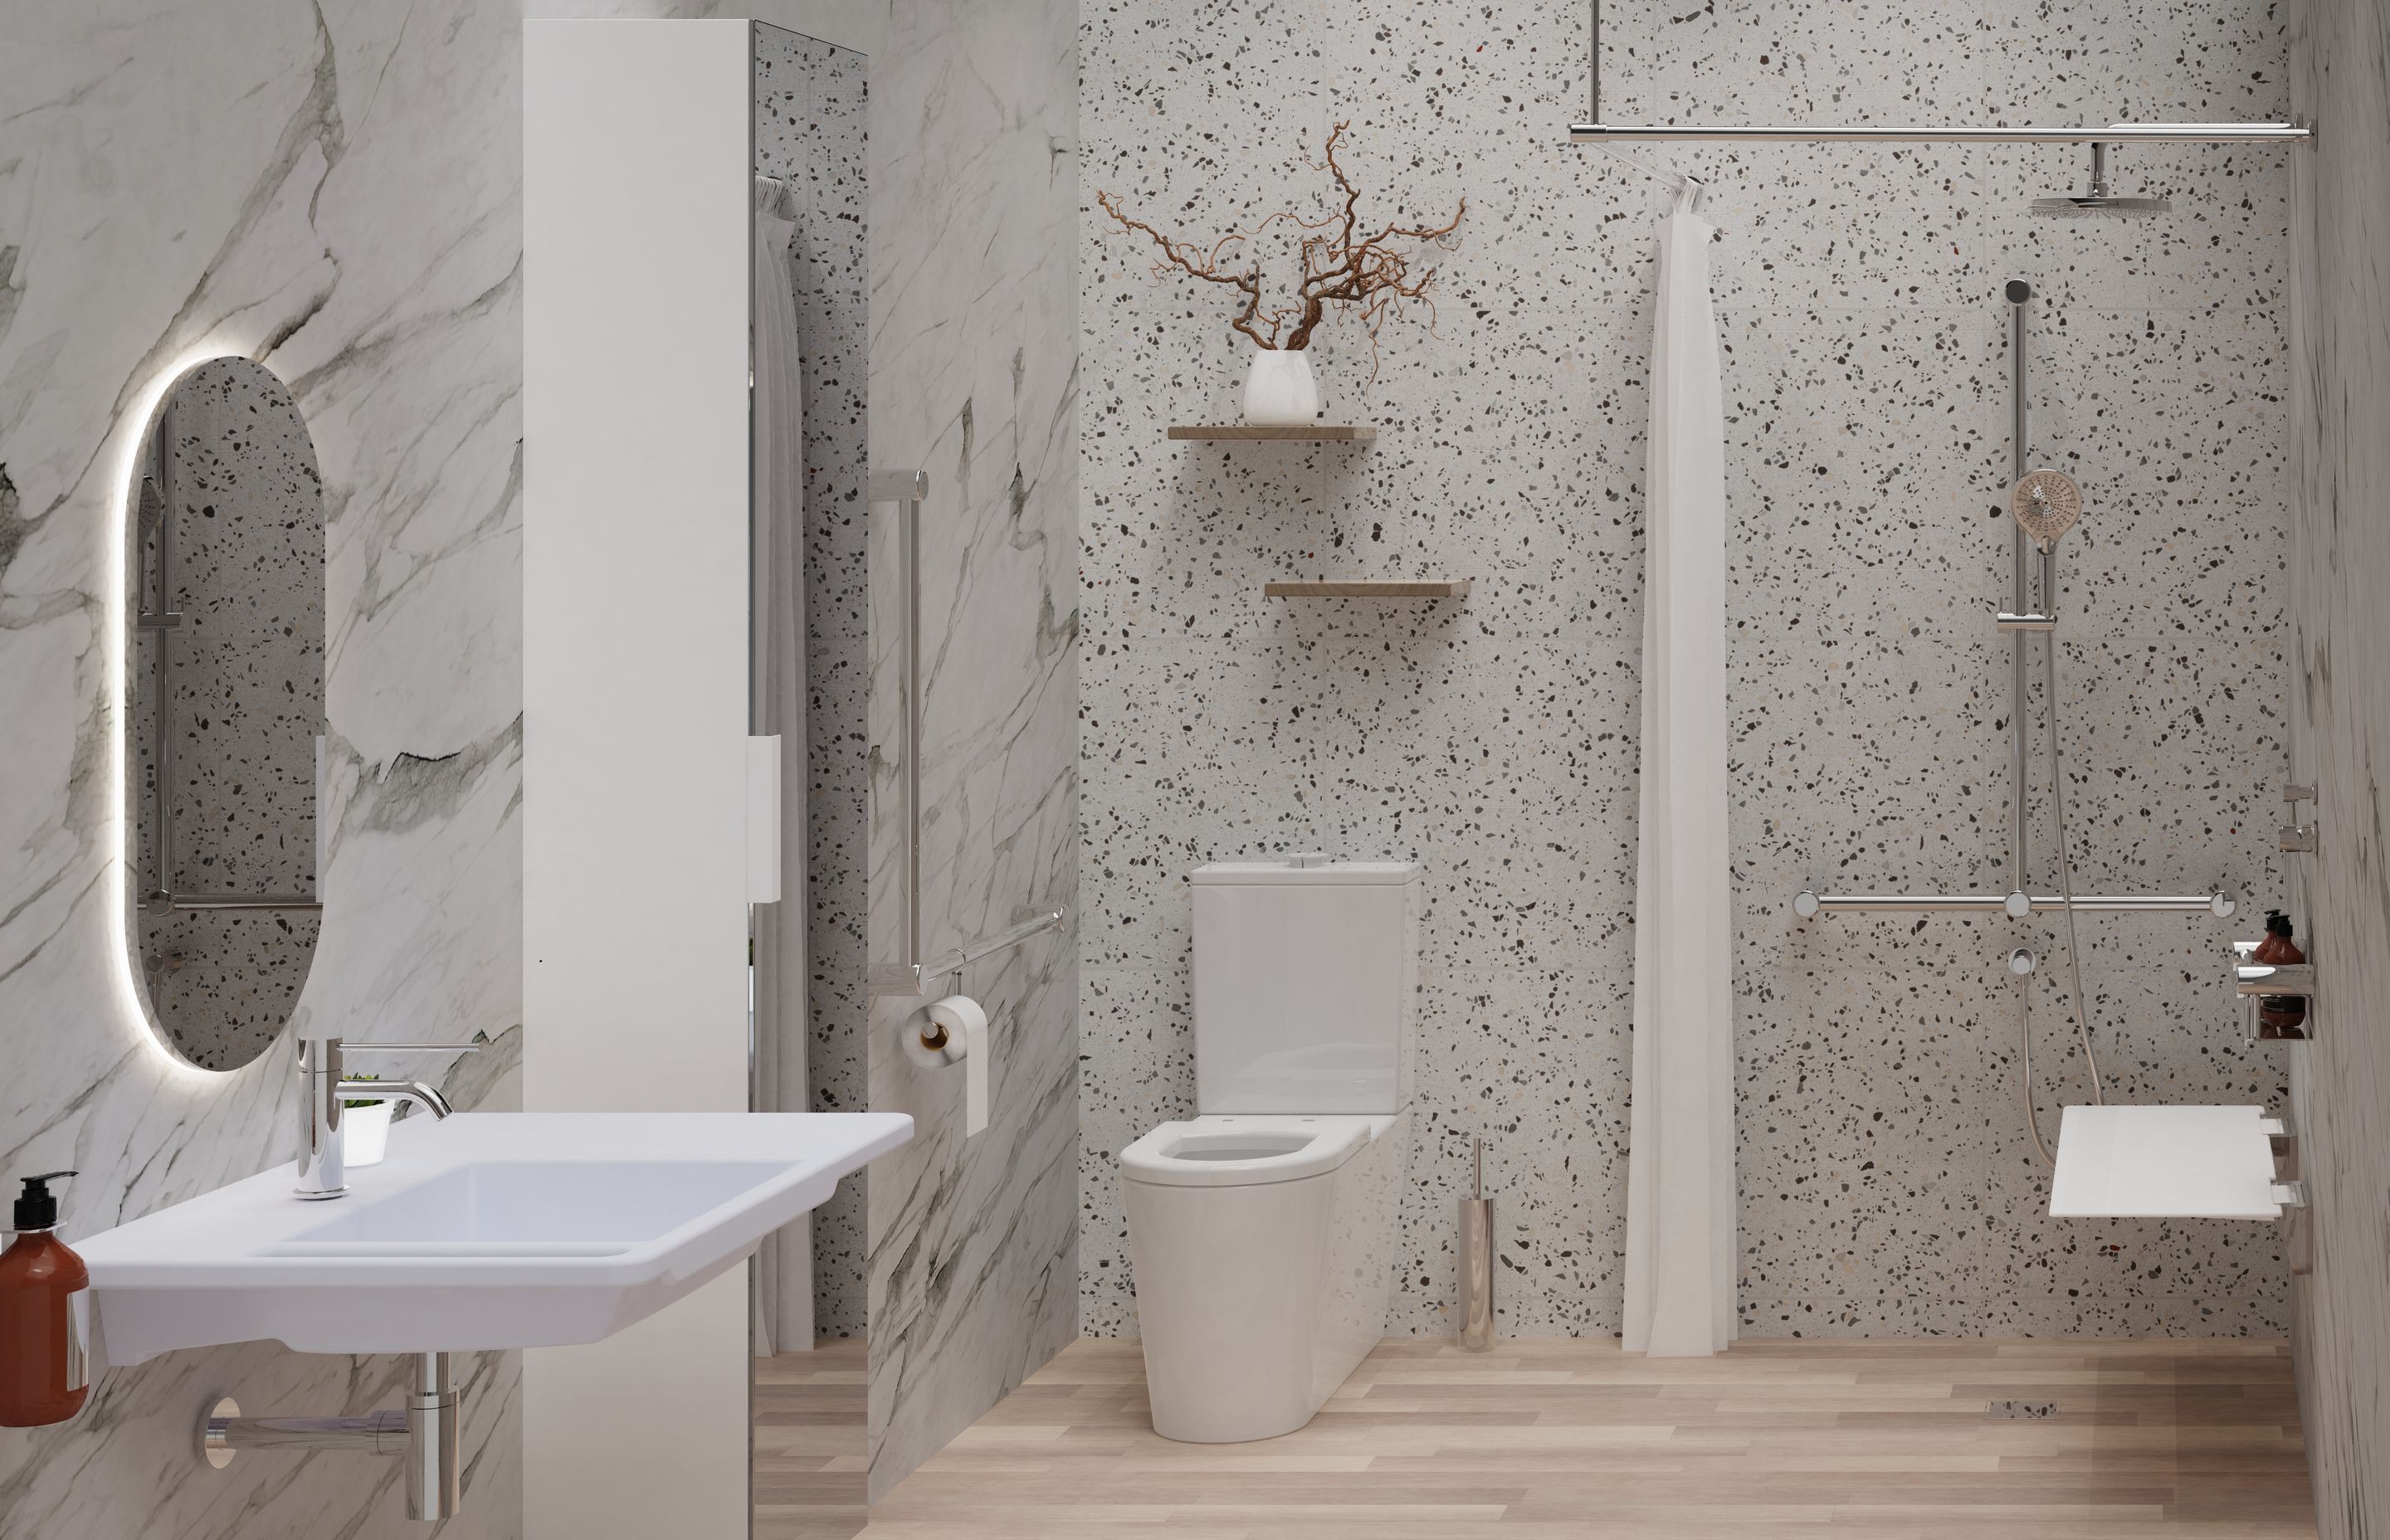  SA Plumbing Supply has collaborated with Avail Design to make its range of accessible bathroomware available in New Zealand.